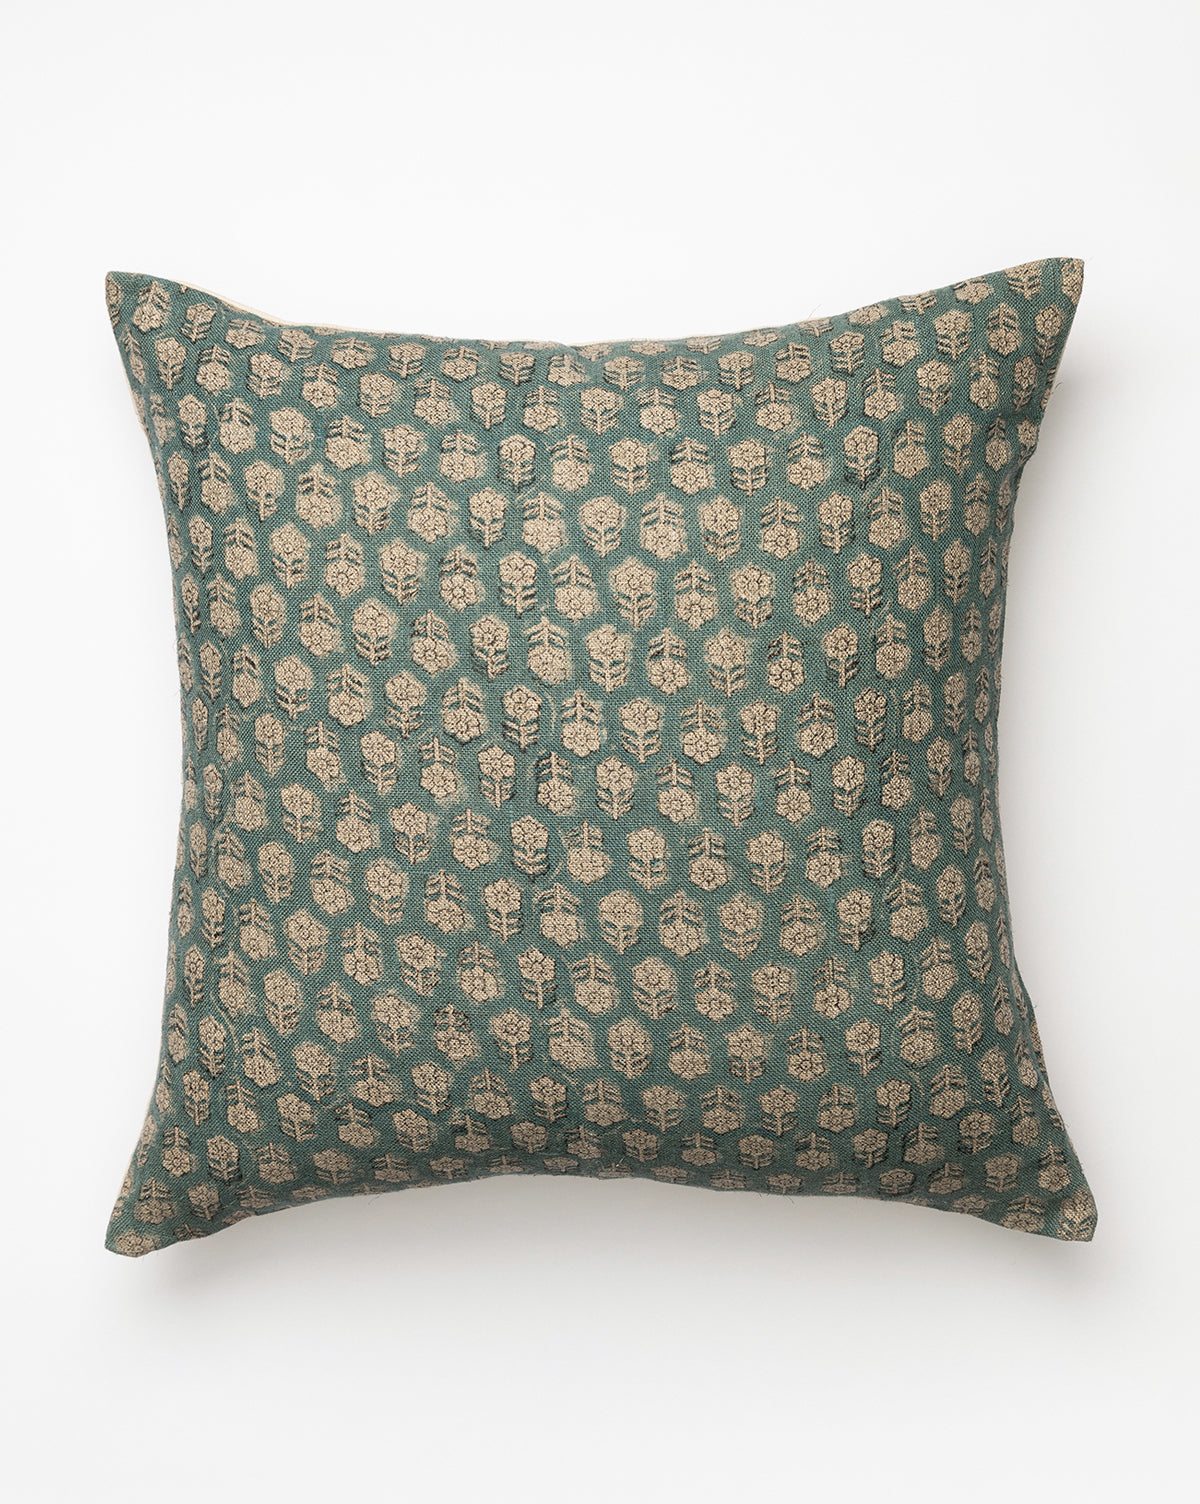 Filling Spaces, Perla Pillow Cover